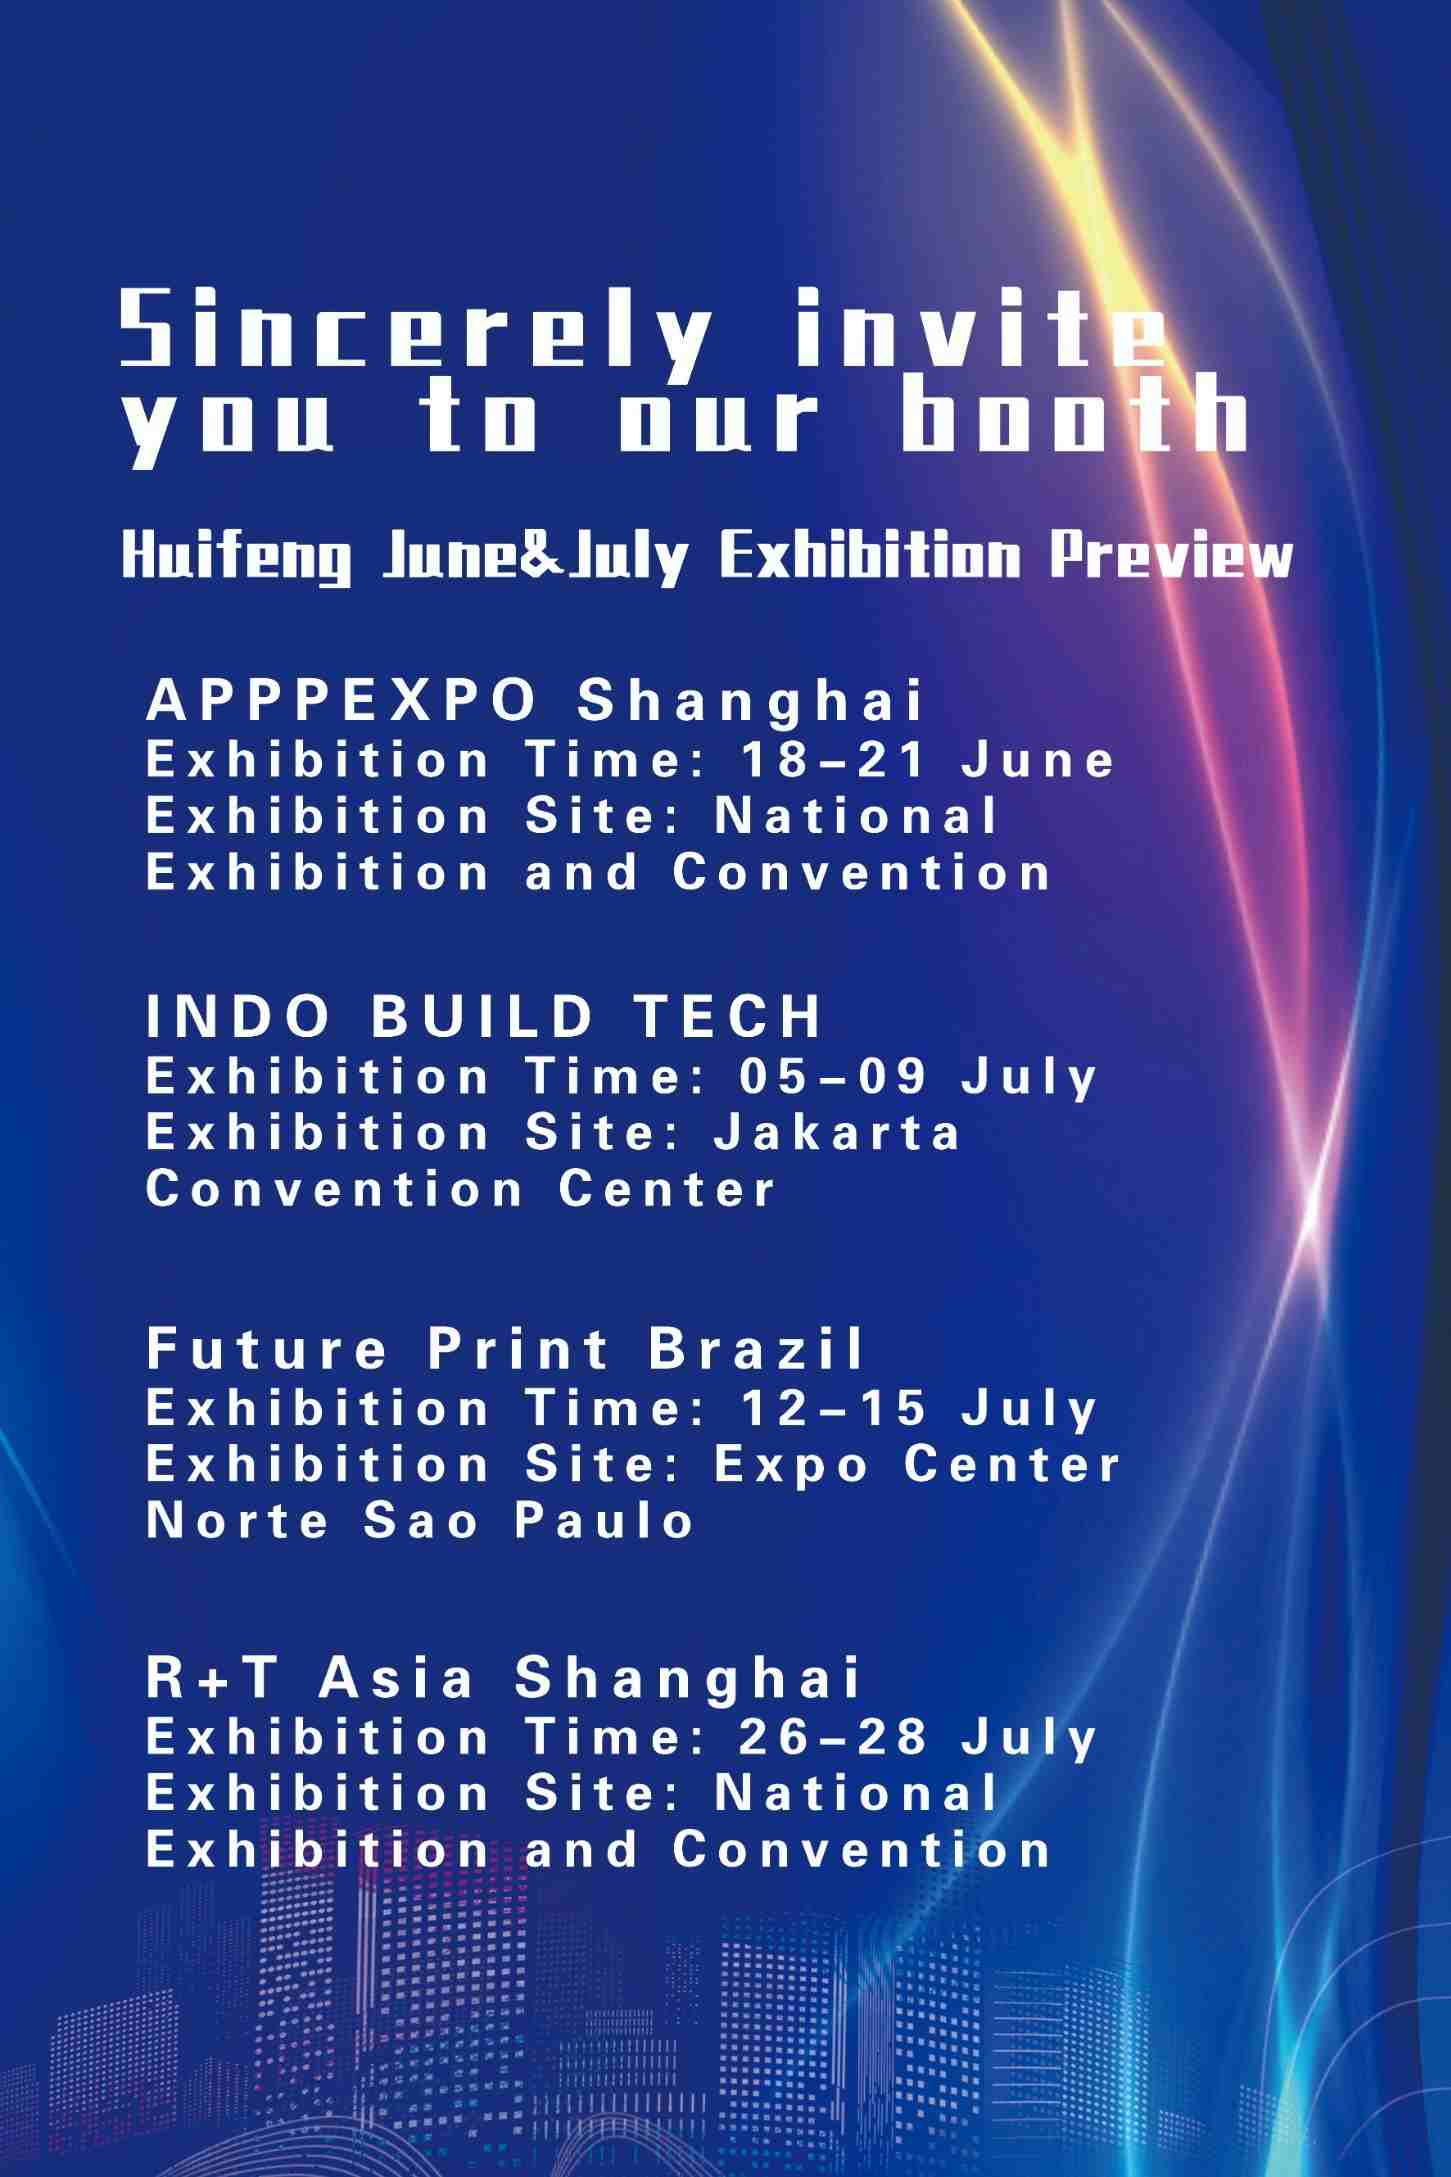 Sincerely invite you to our booth-Huifeng September Exhibition Preview